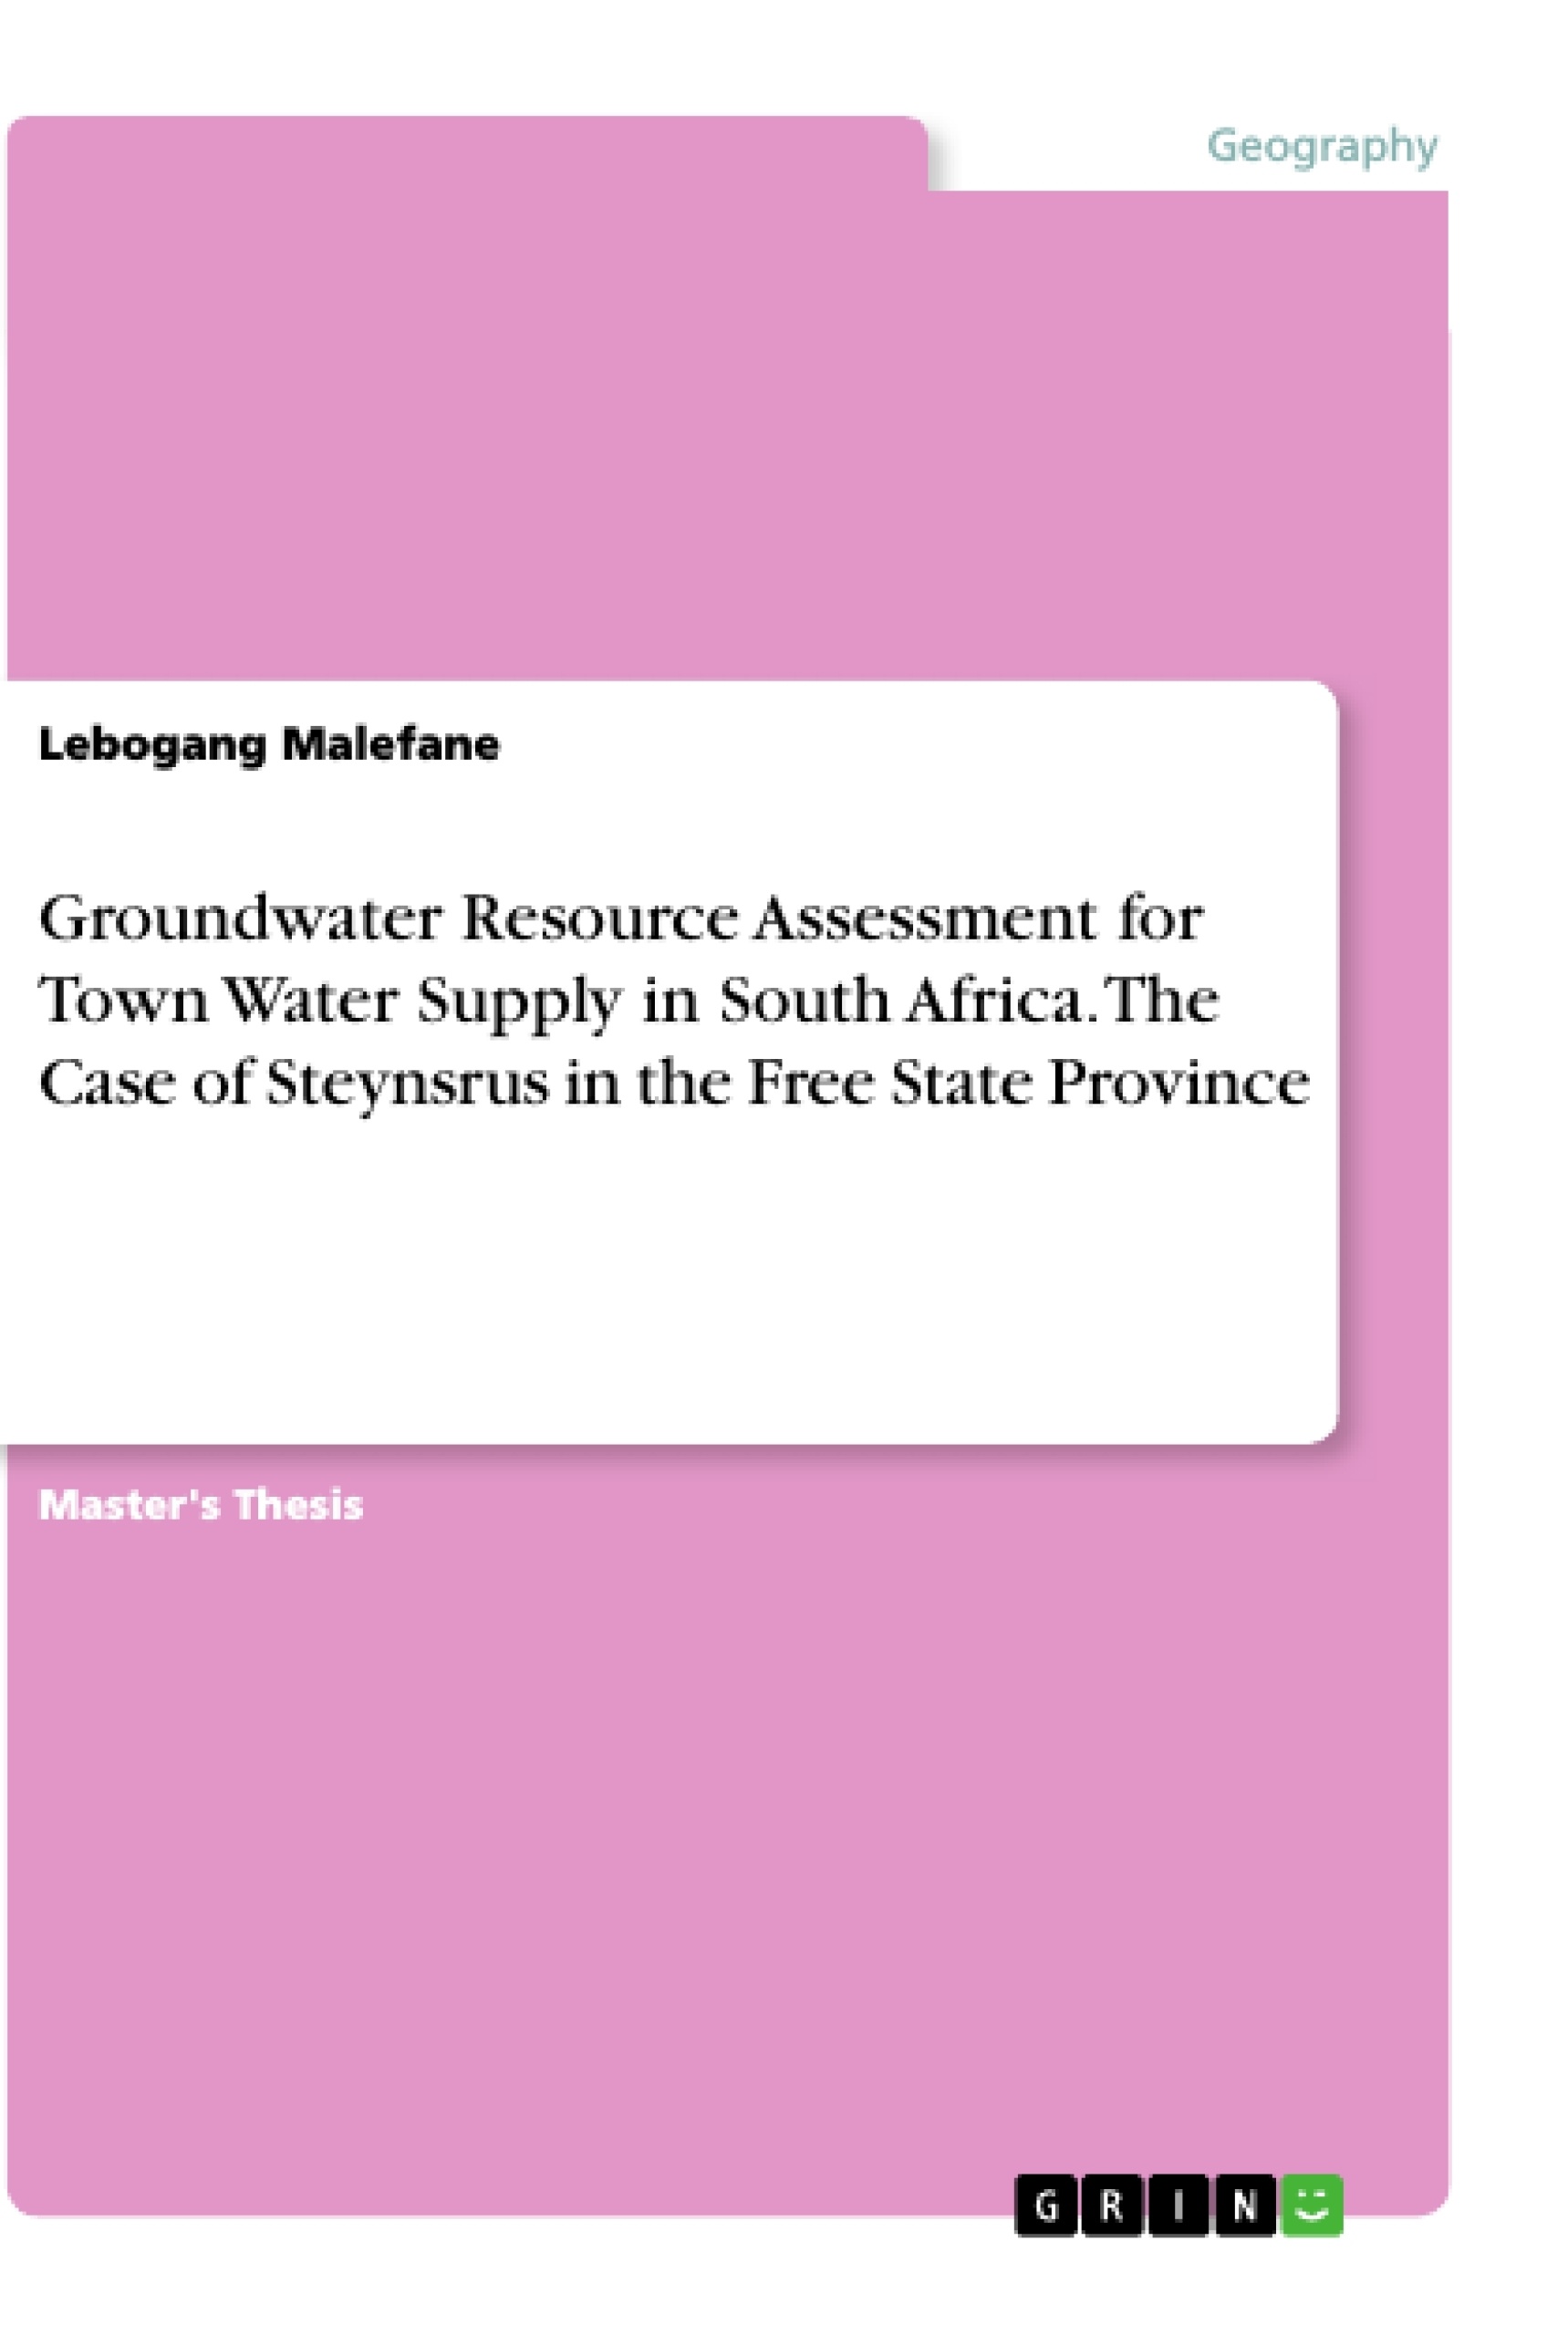 Title: Groundwater Resource Assessment for Town Water Supply in South Africa. The Case of Steynsrus in the Free State Province